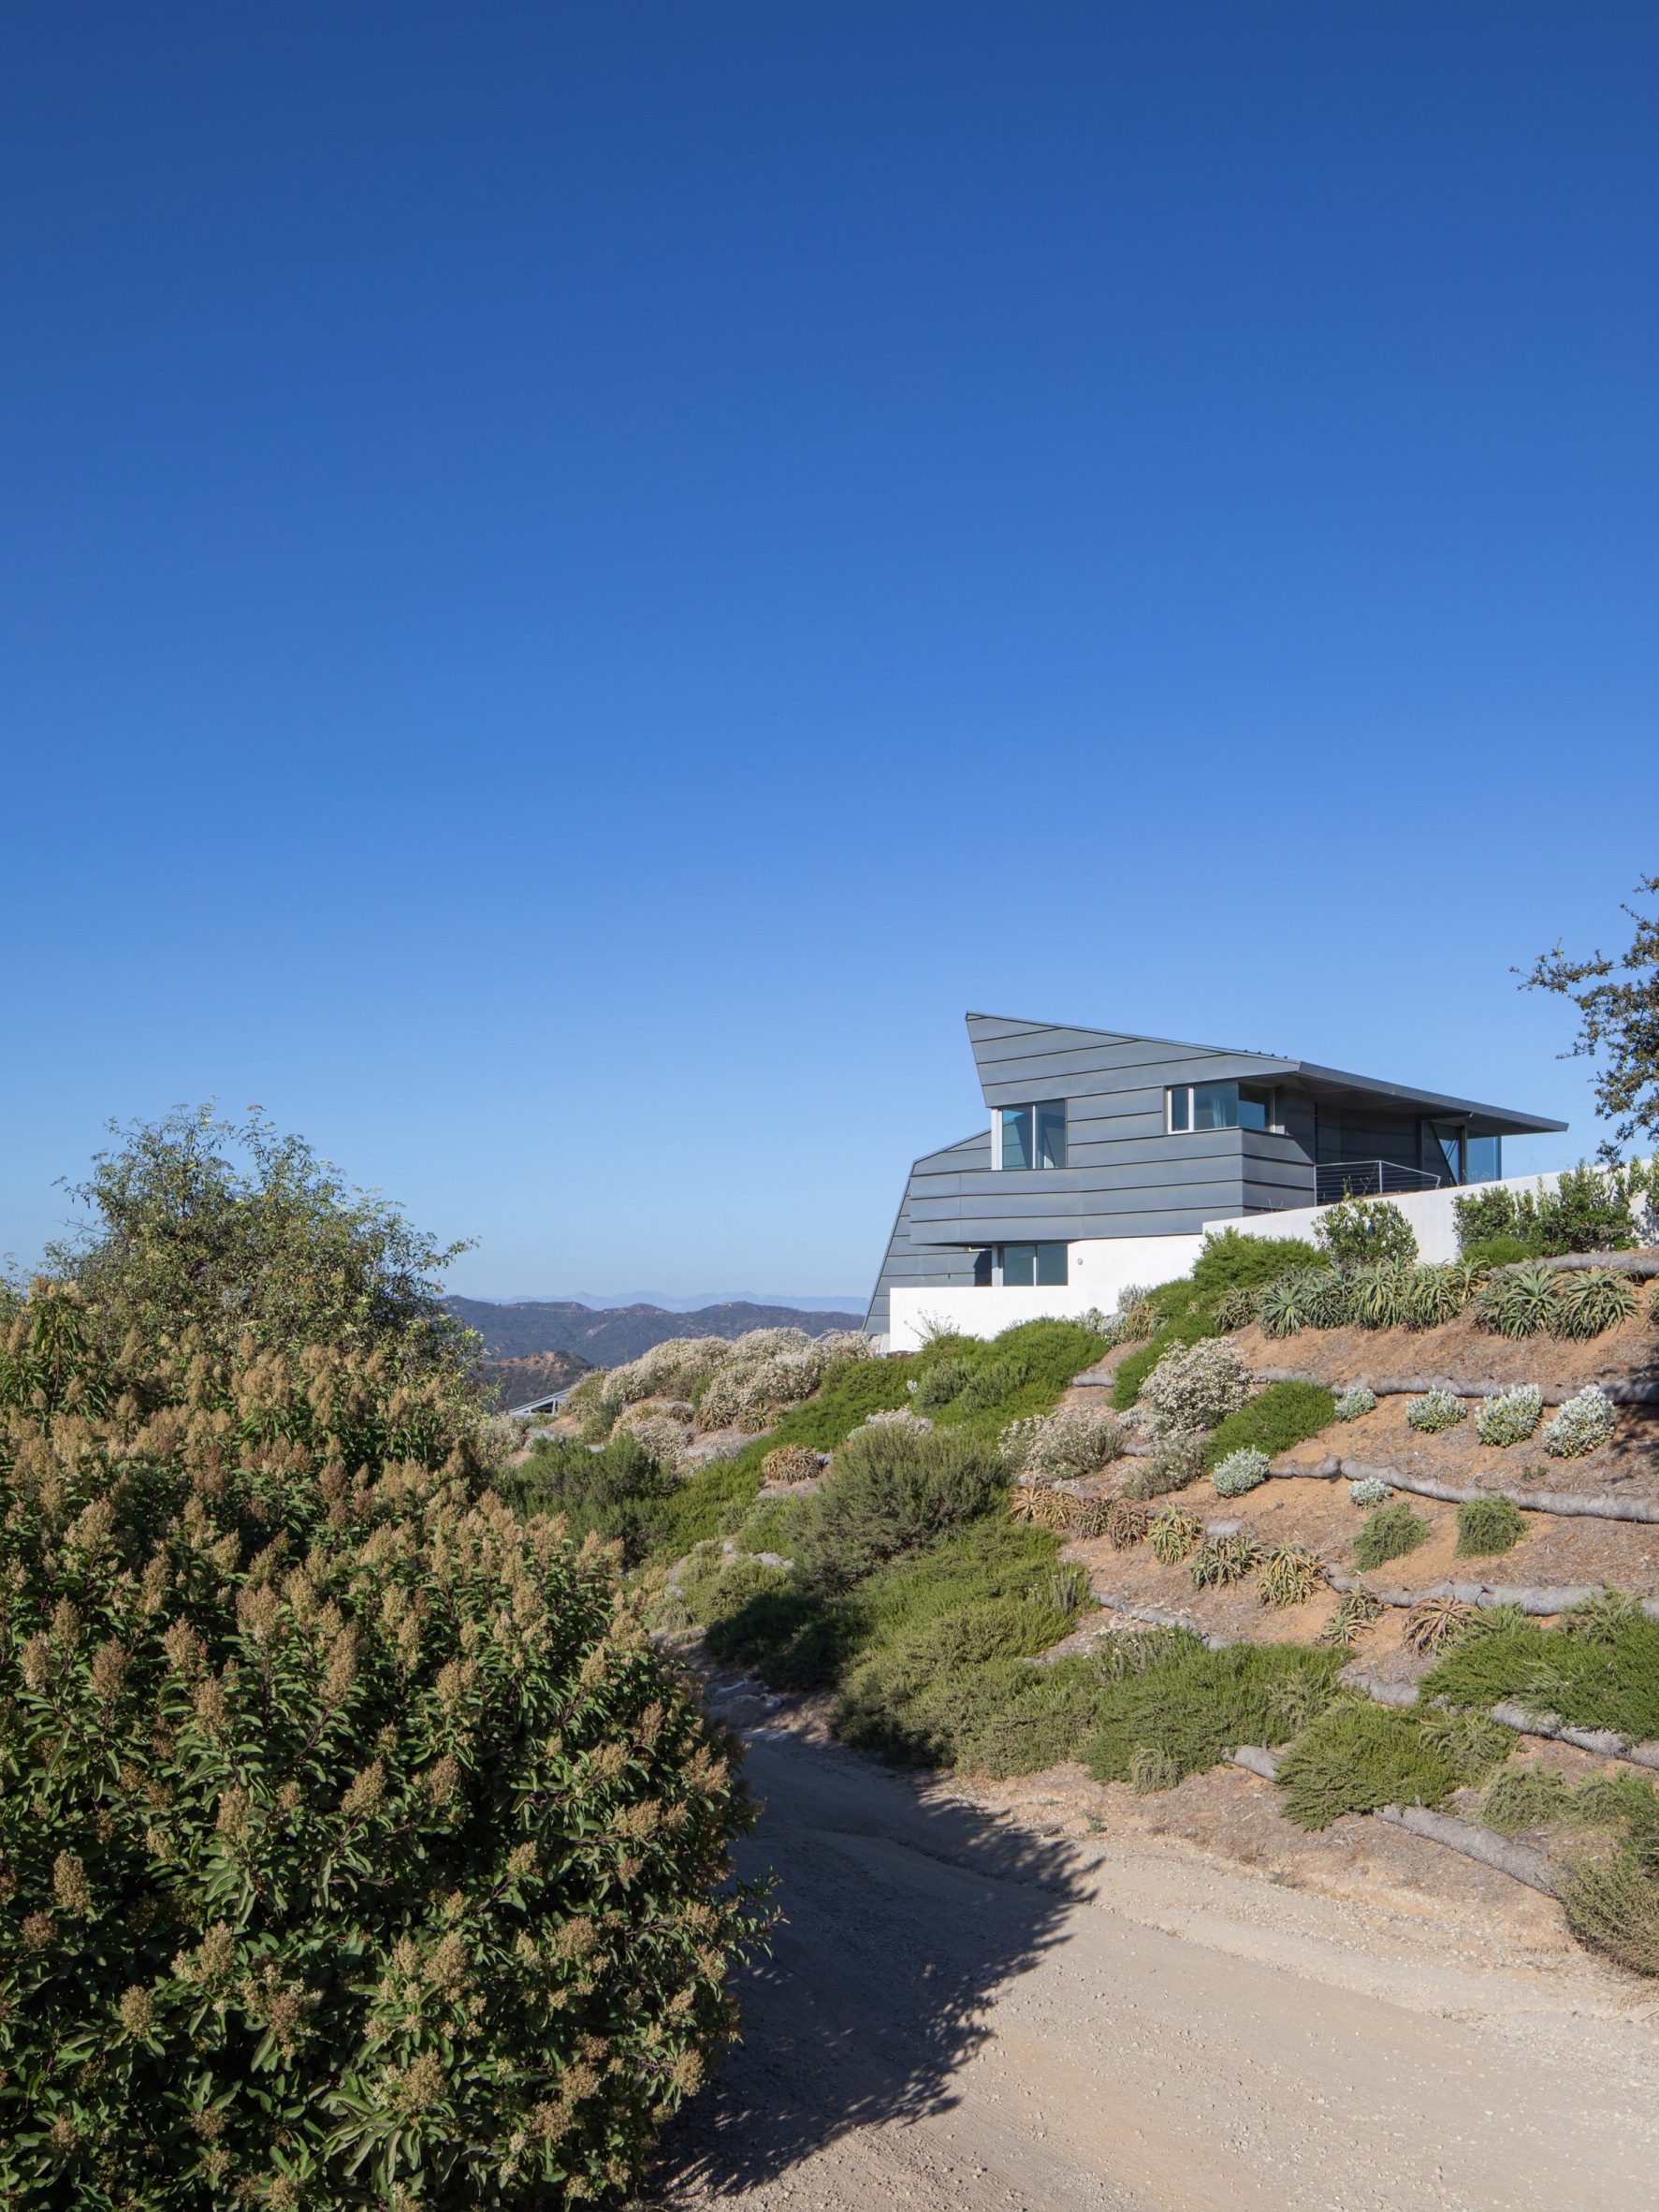 4/Way House sitting on the top of a grassy hill